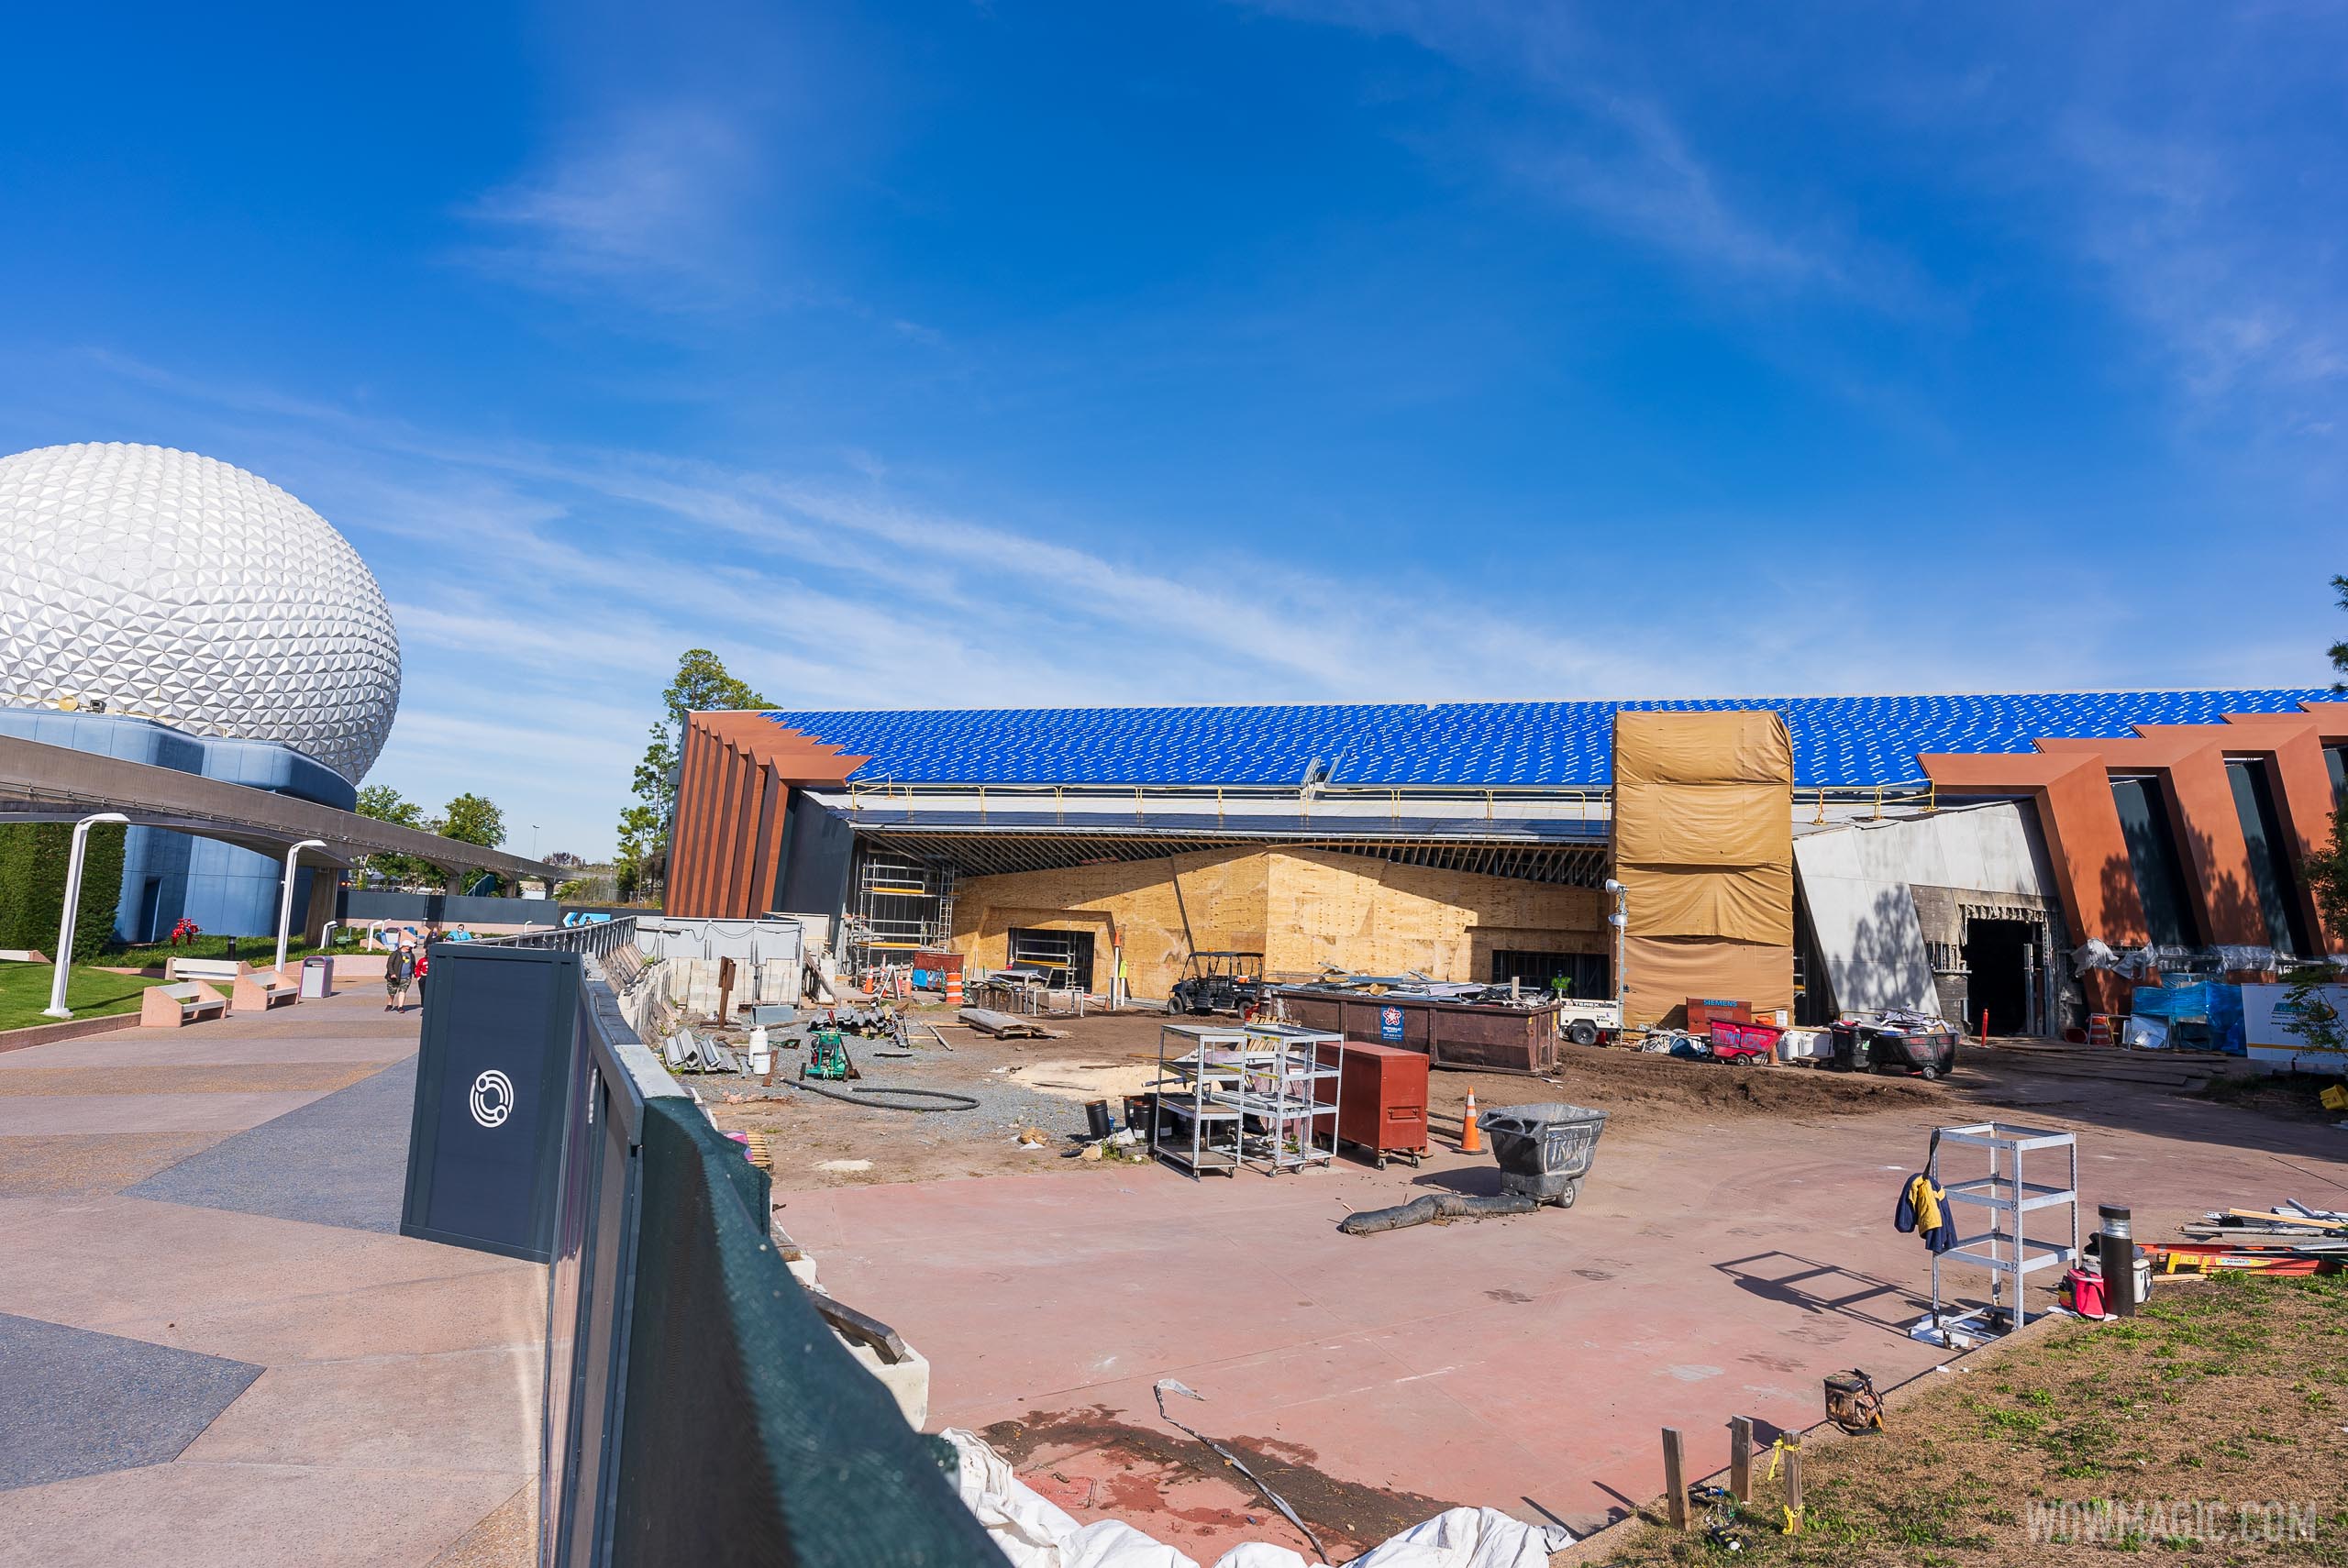 Guardians of the Galaxy Cosmic Rewind construction at EPCOT